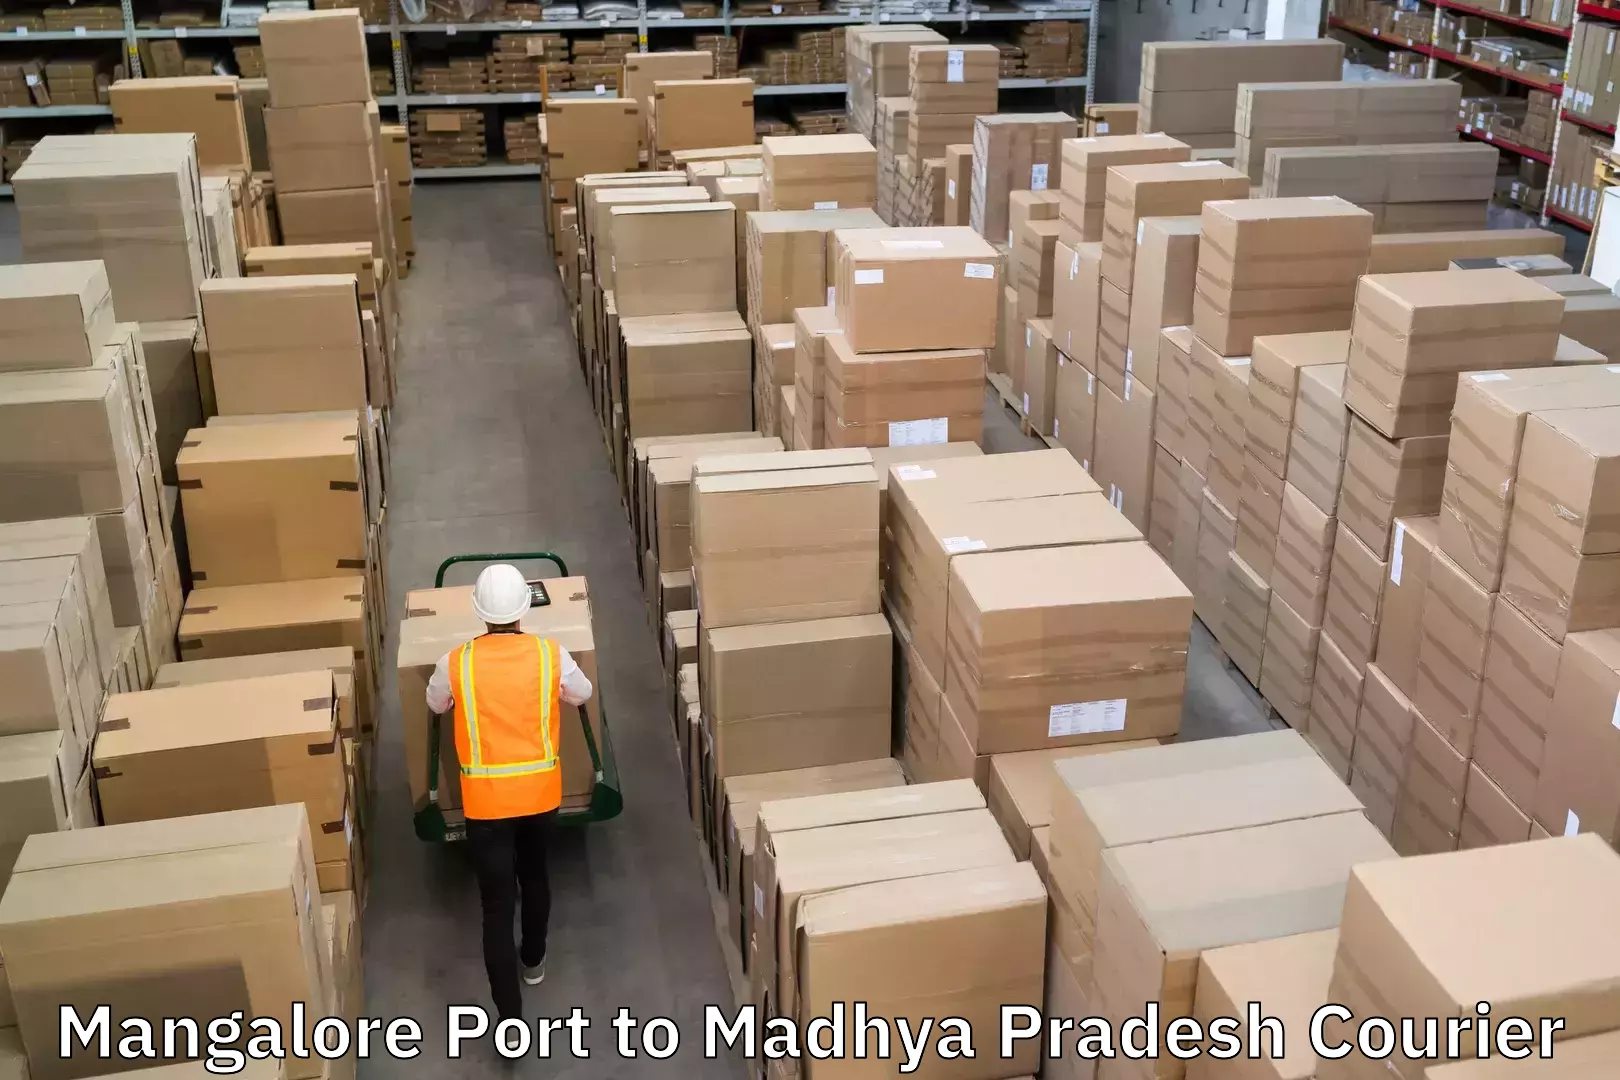 Flexible delivery scheduling Mangalore Port to Madhya Pradesh